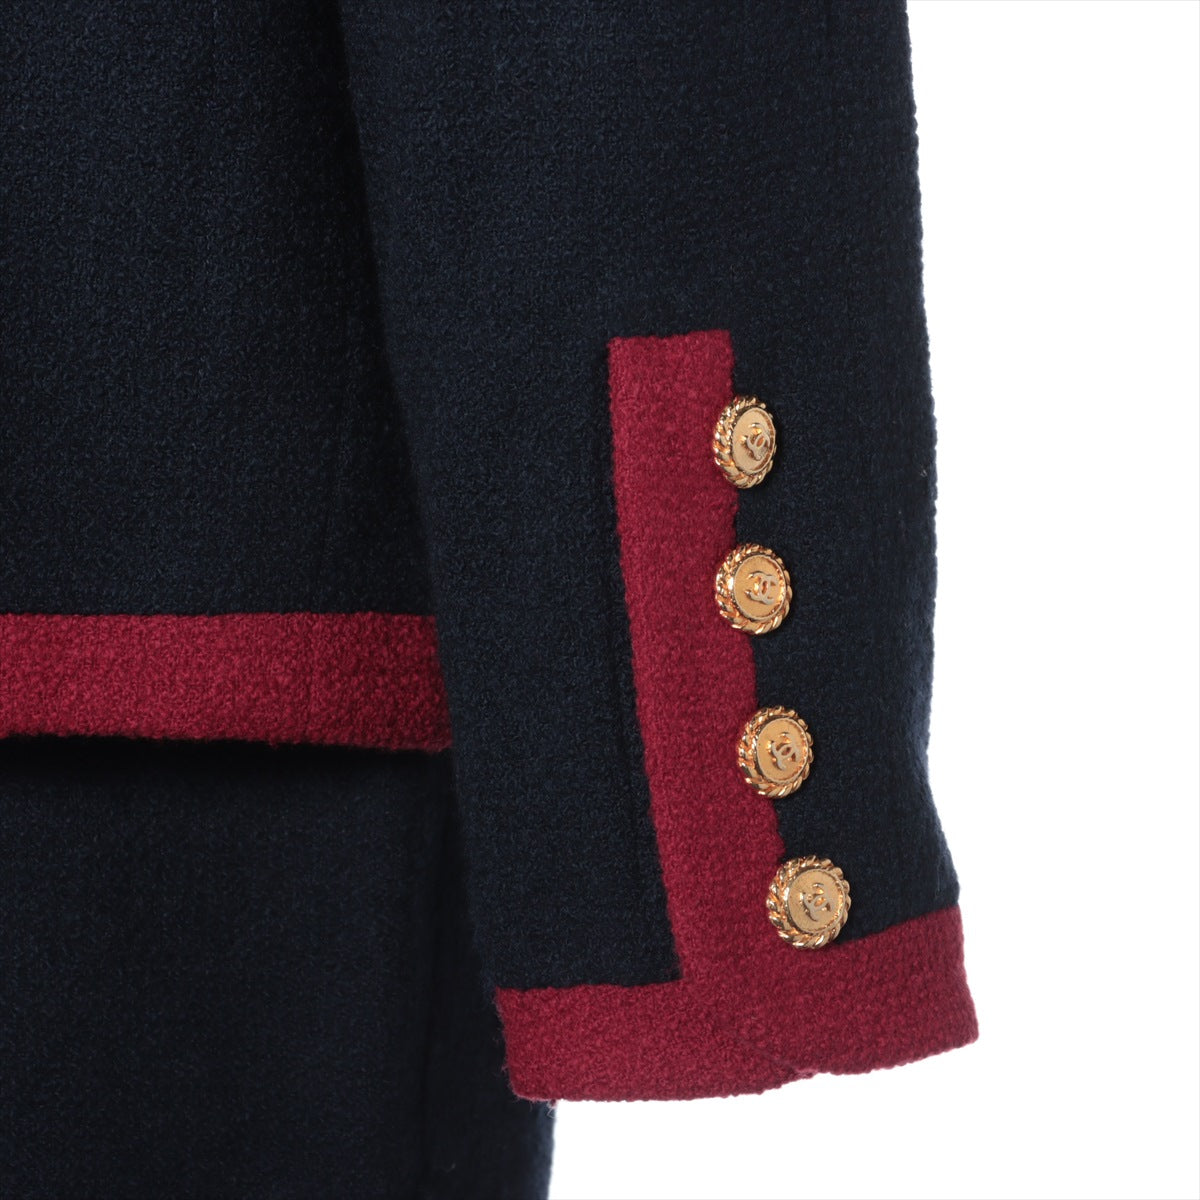 Chanel Coco Button Vintage Wool Setup 34 Ladies' Navy x red  20370 Bicolor Gold button